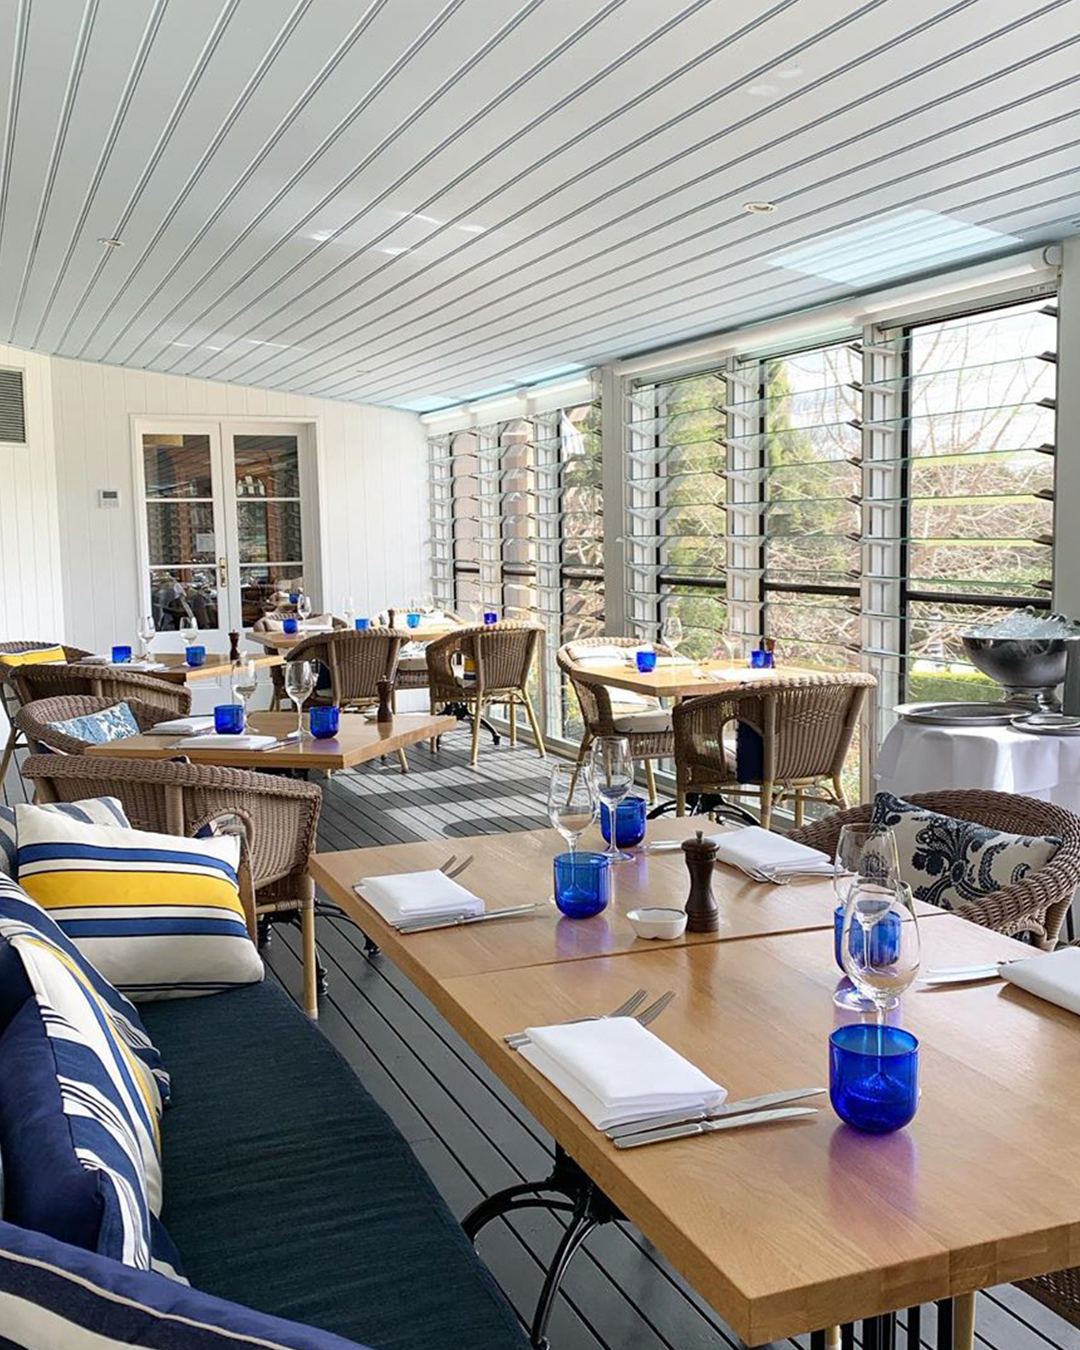 A spacious dining area on the verandah with nautical-style soft furnishings and blue glasses.